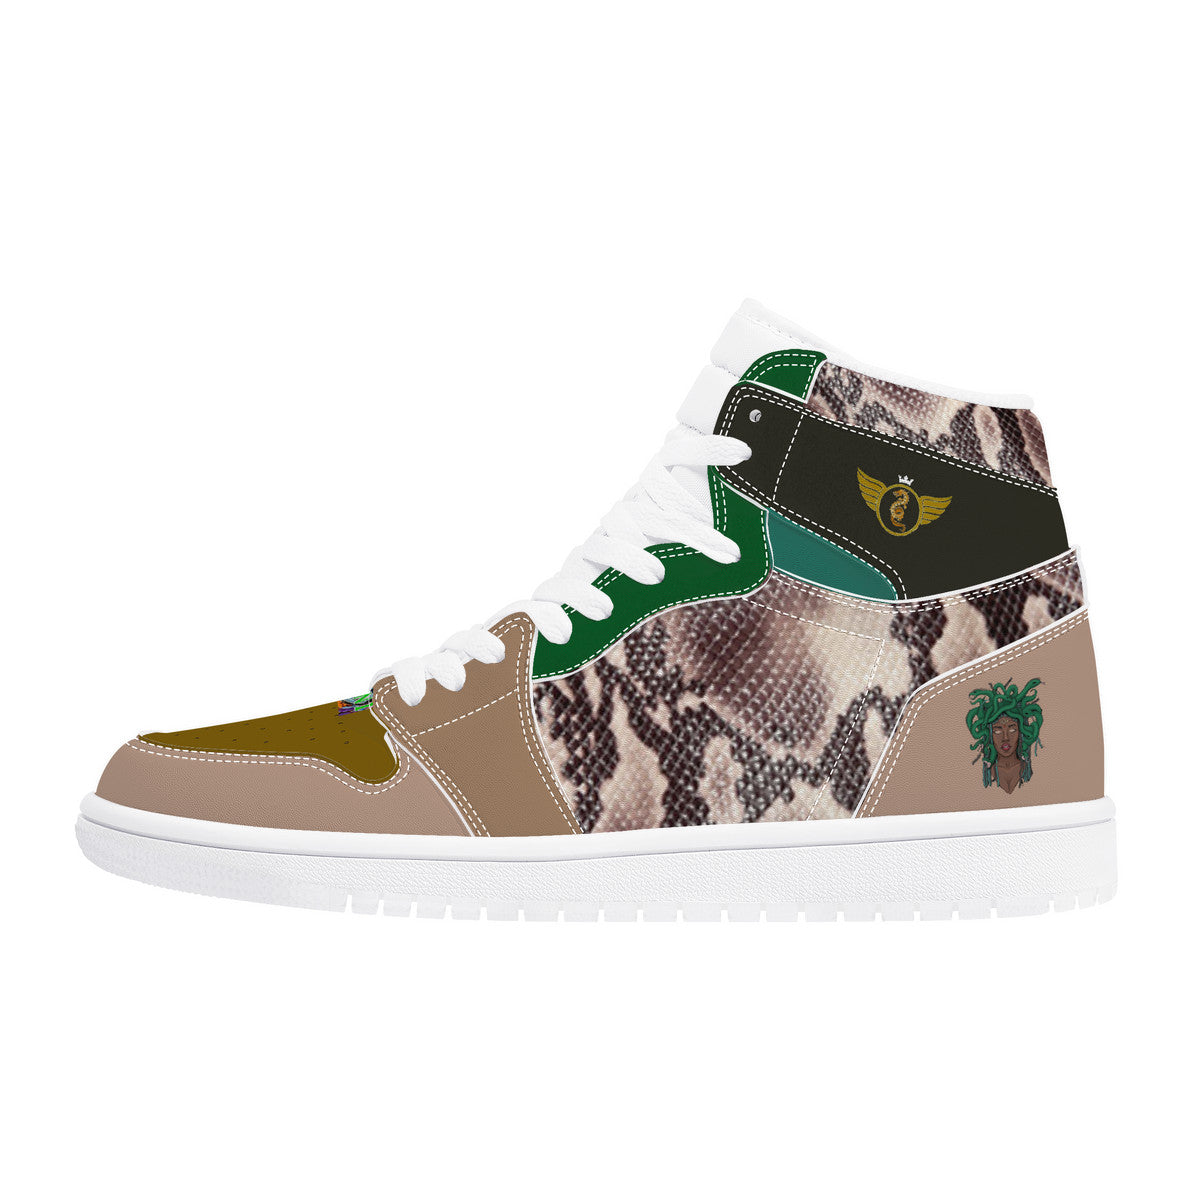 Majestic Snake Scales and Green Print | Vision 1 Collection | High Top Sneaker - Designed Shoe Drop - Shoe Zero